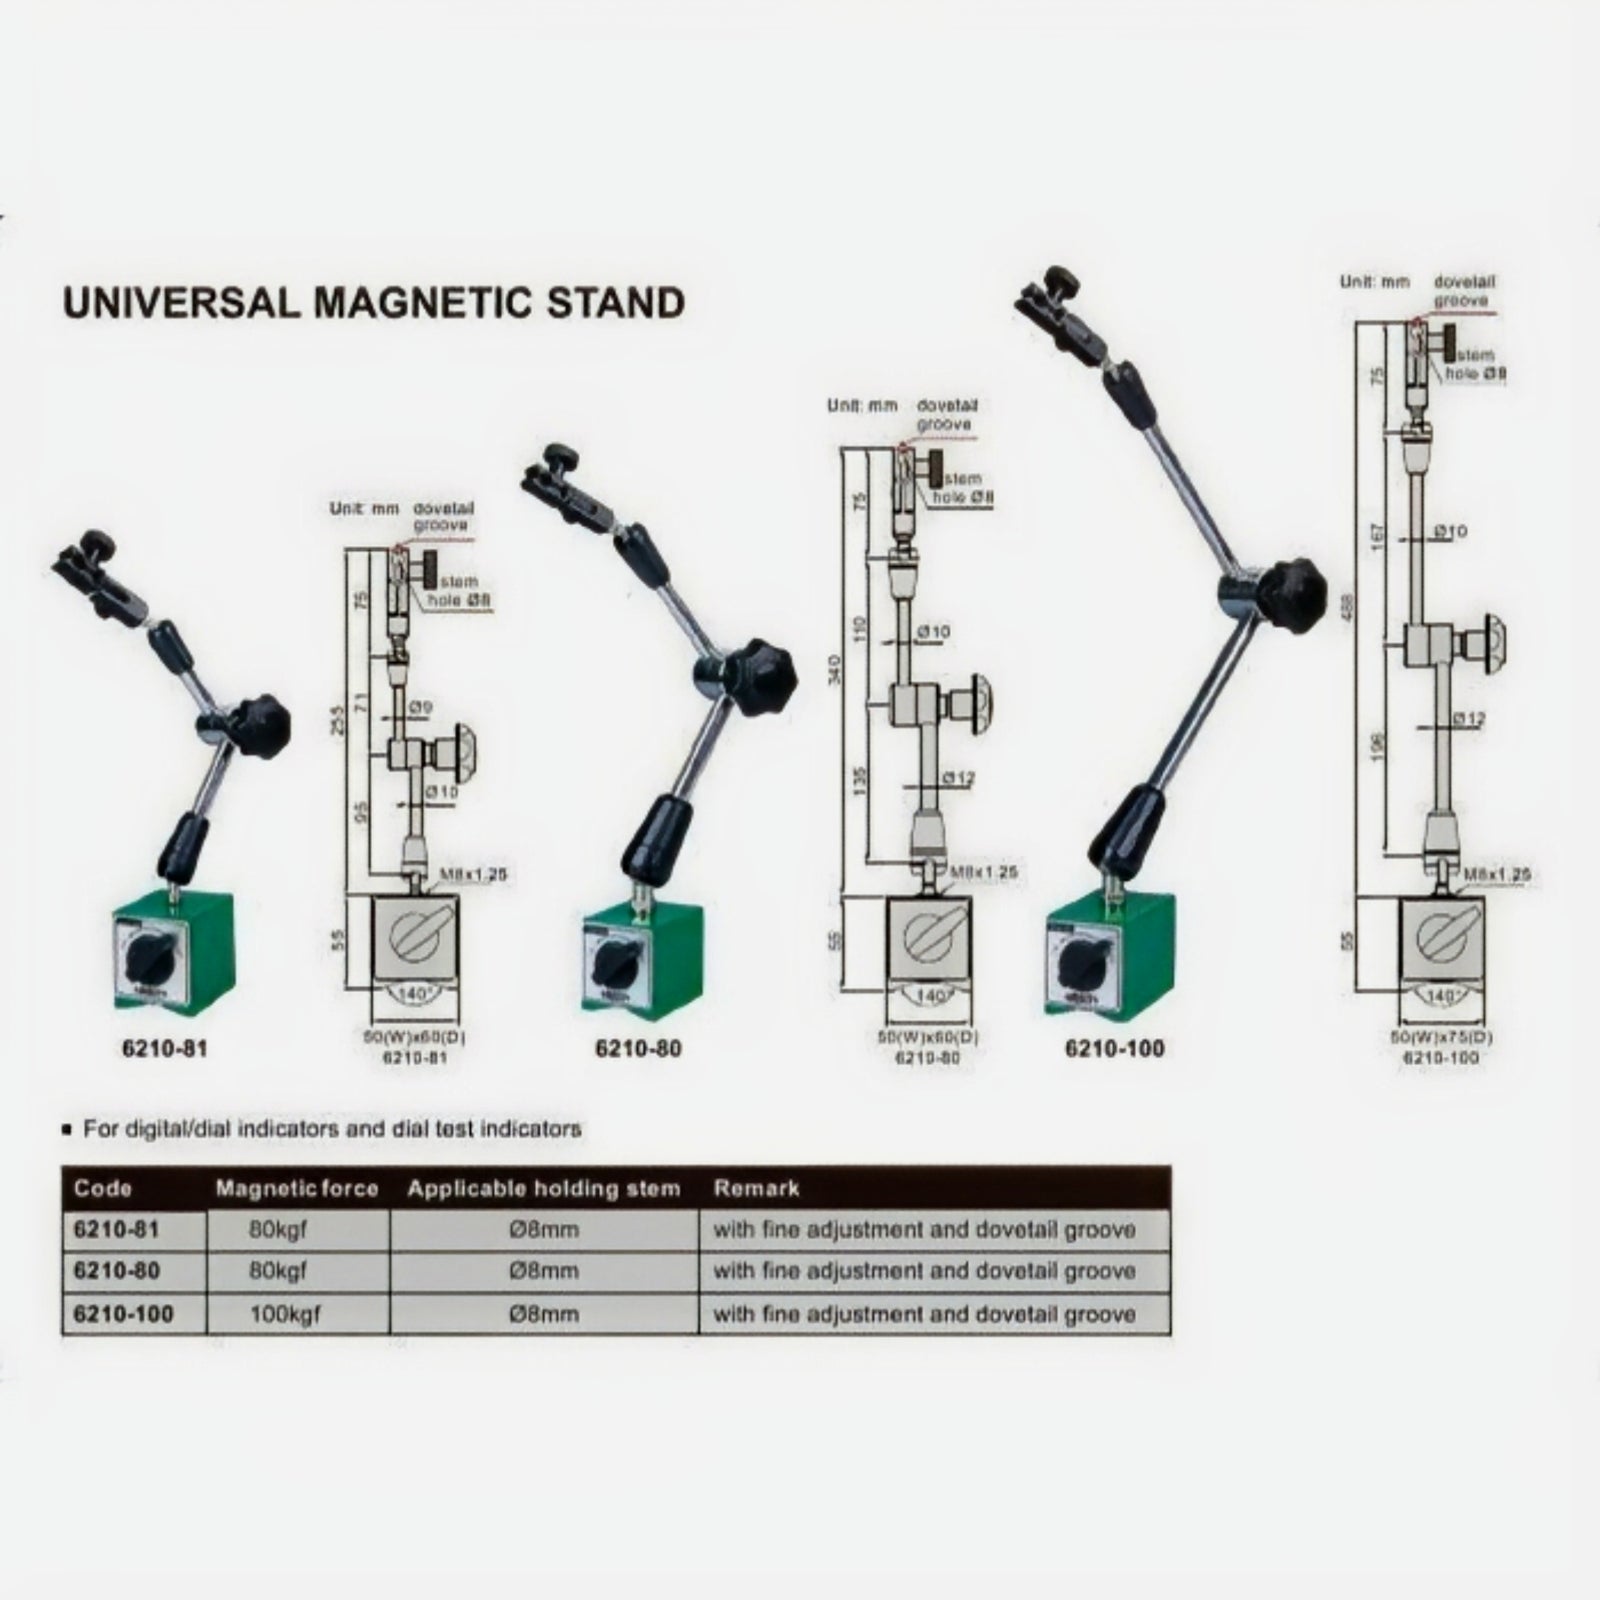 Insize Mechanical Lock Magnetic Stand 80 kg Force Series 6210-81